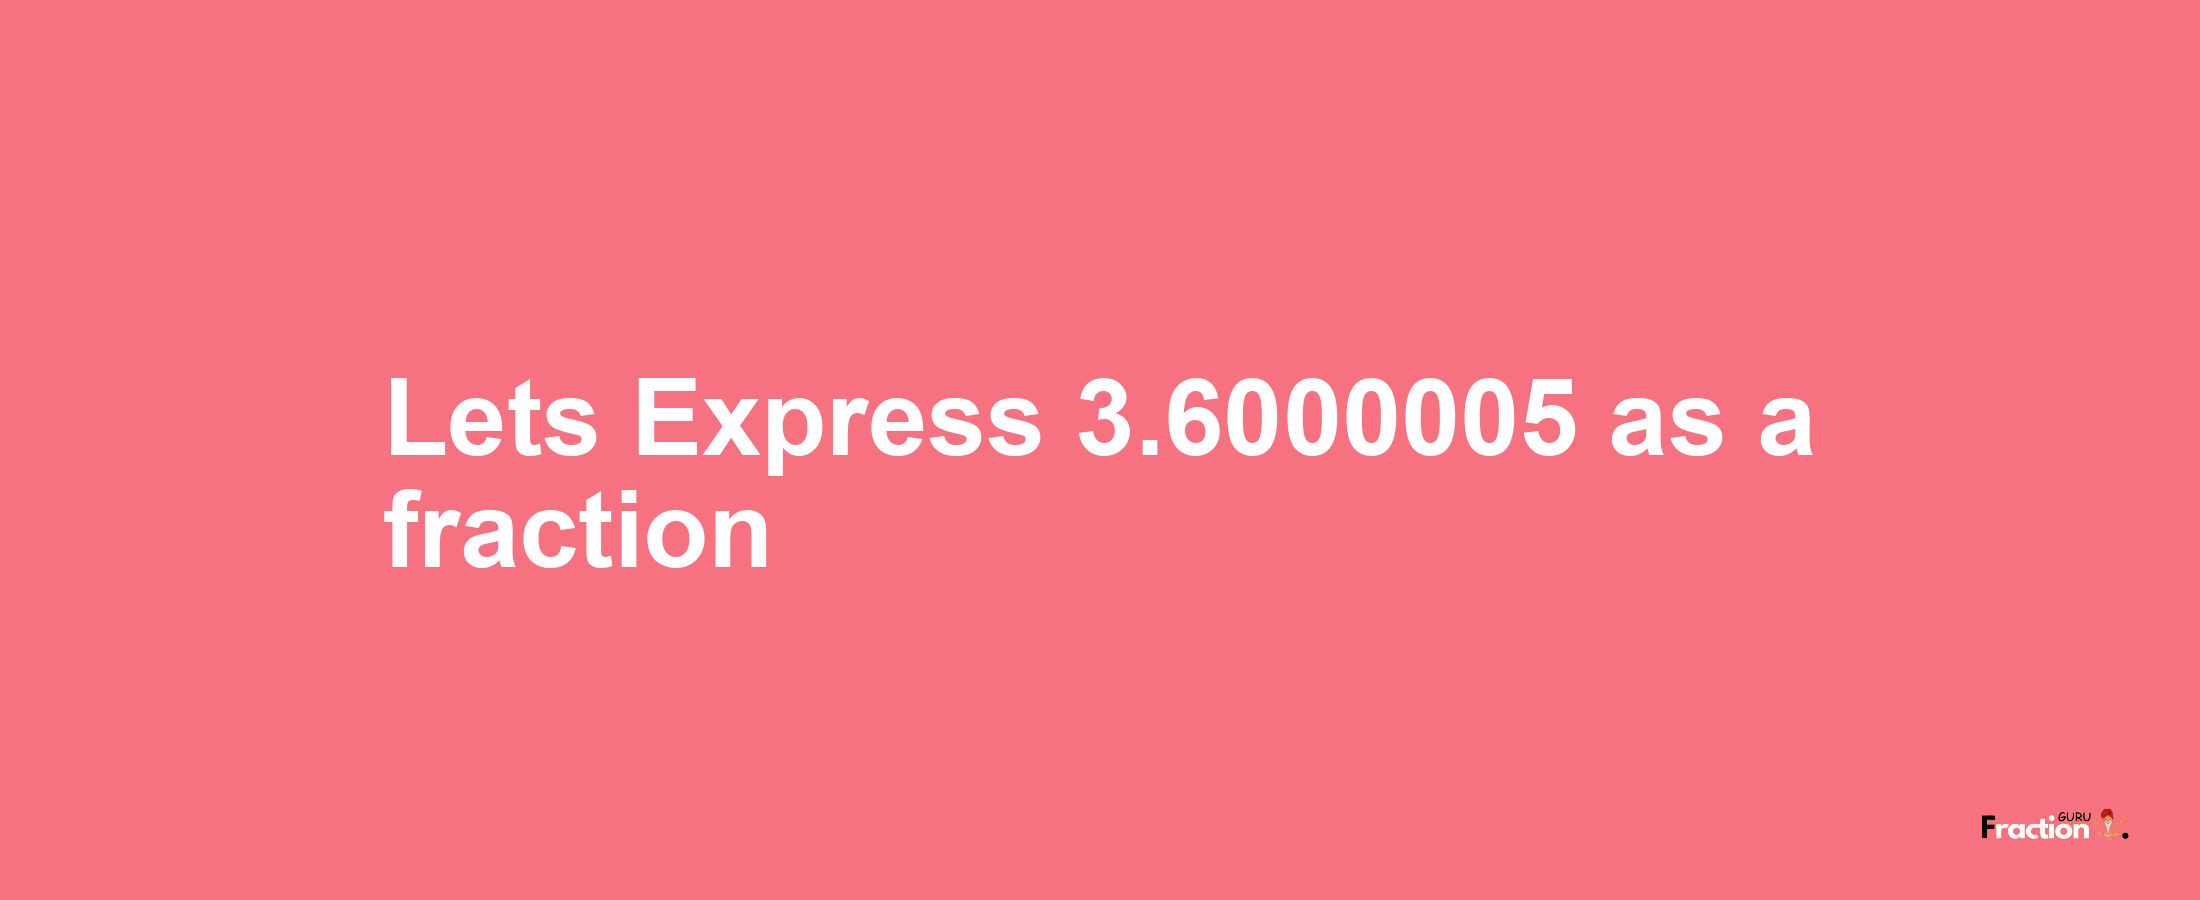 Lets Express 3.6000005 as afraction